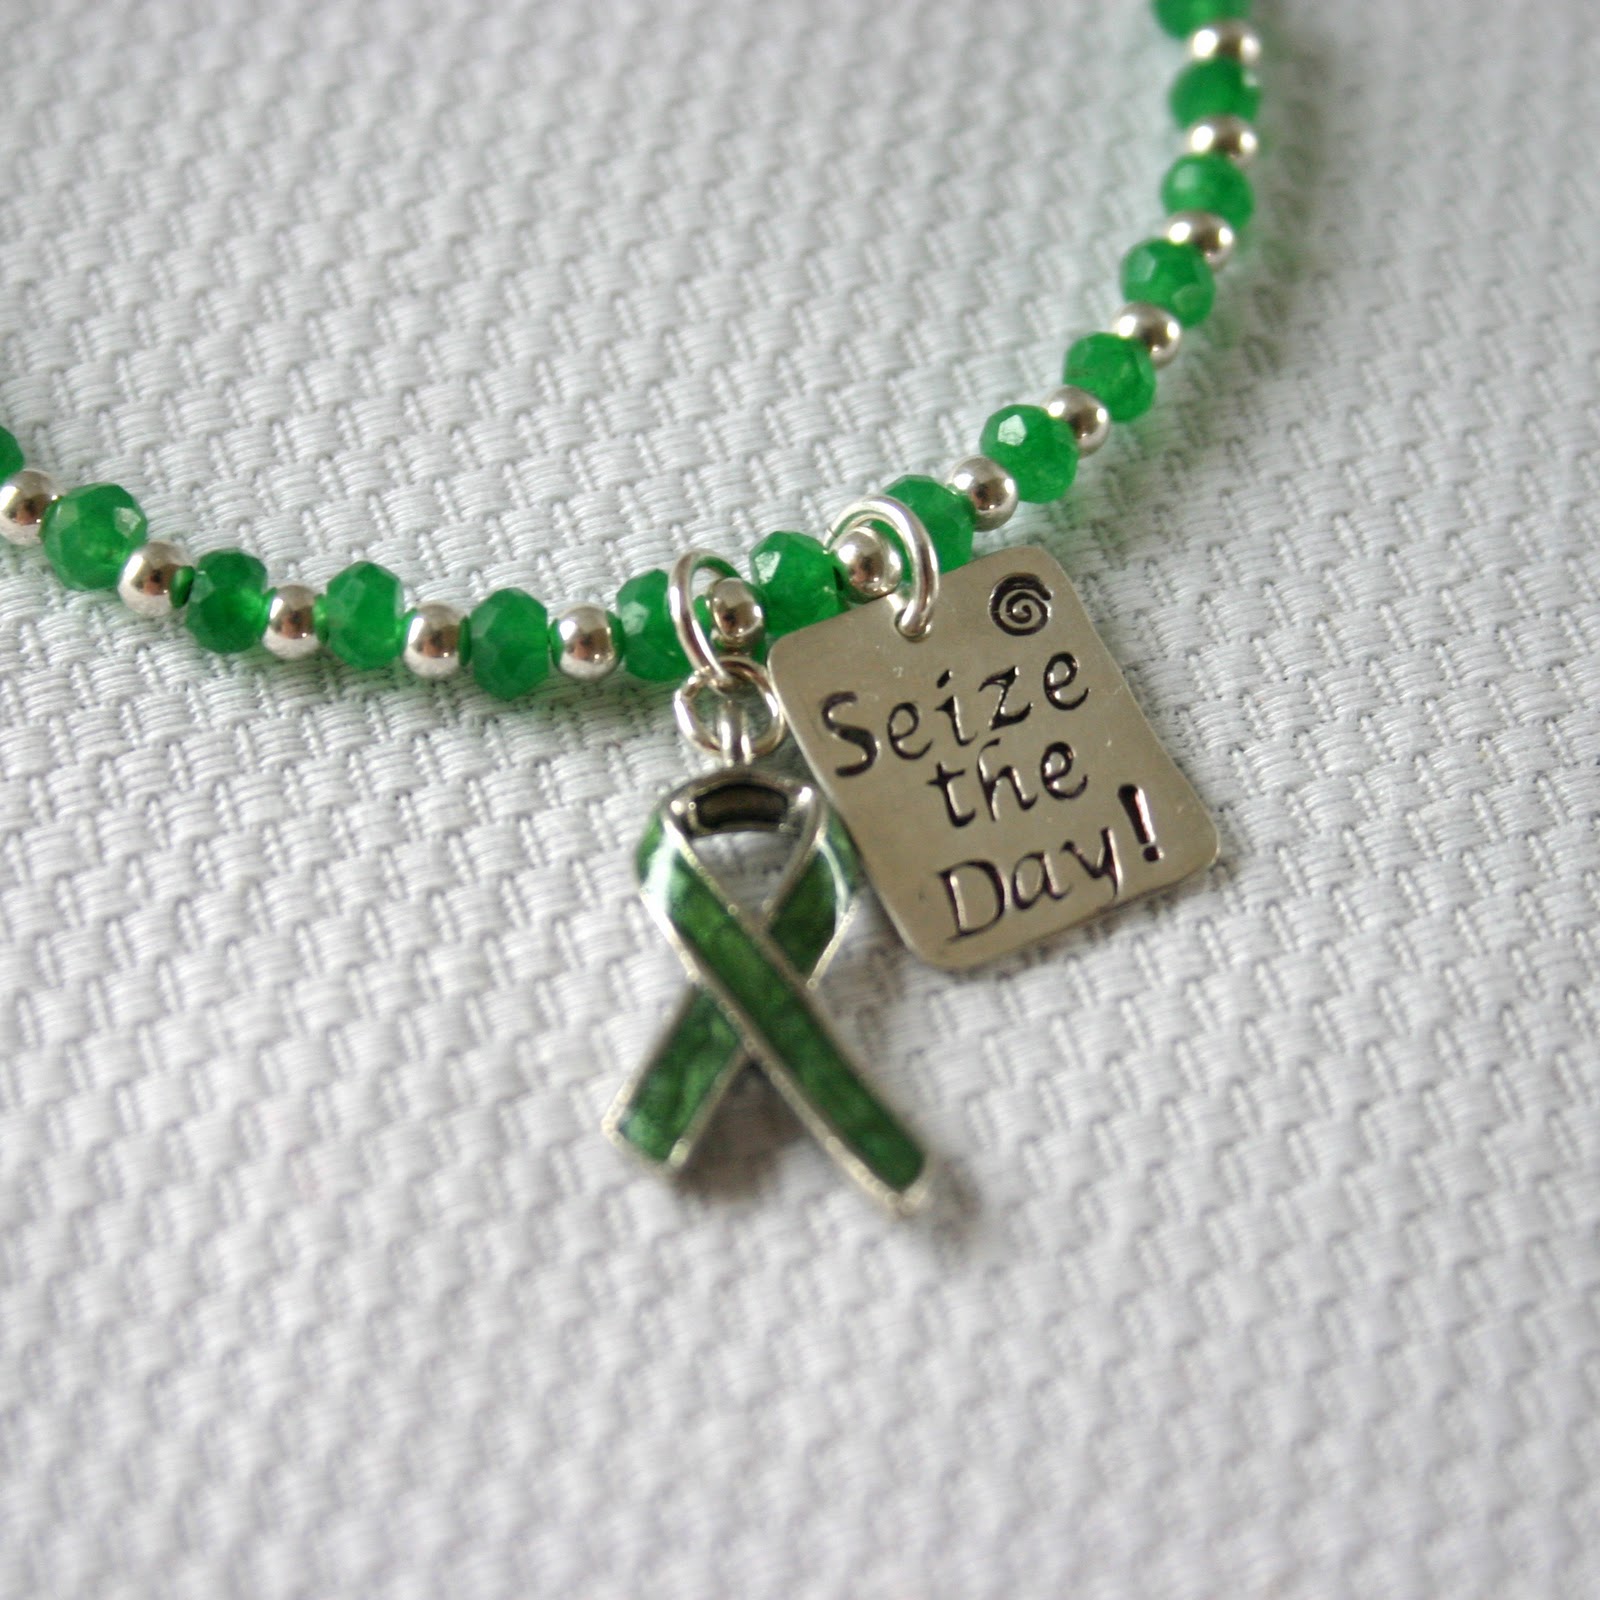 ... Donor, Donor Family and Donate Life sterling silver charms available